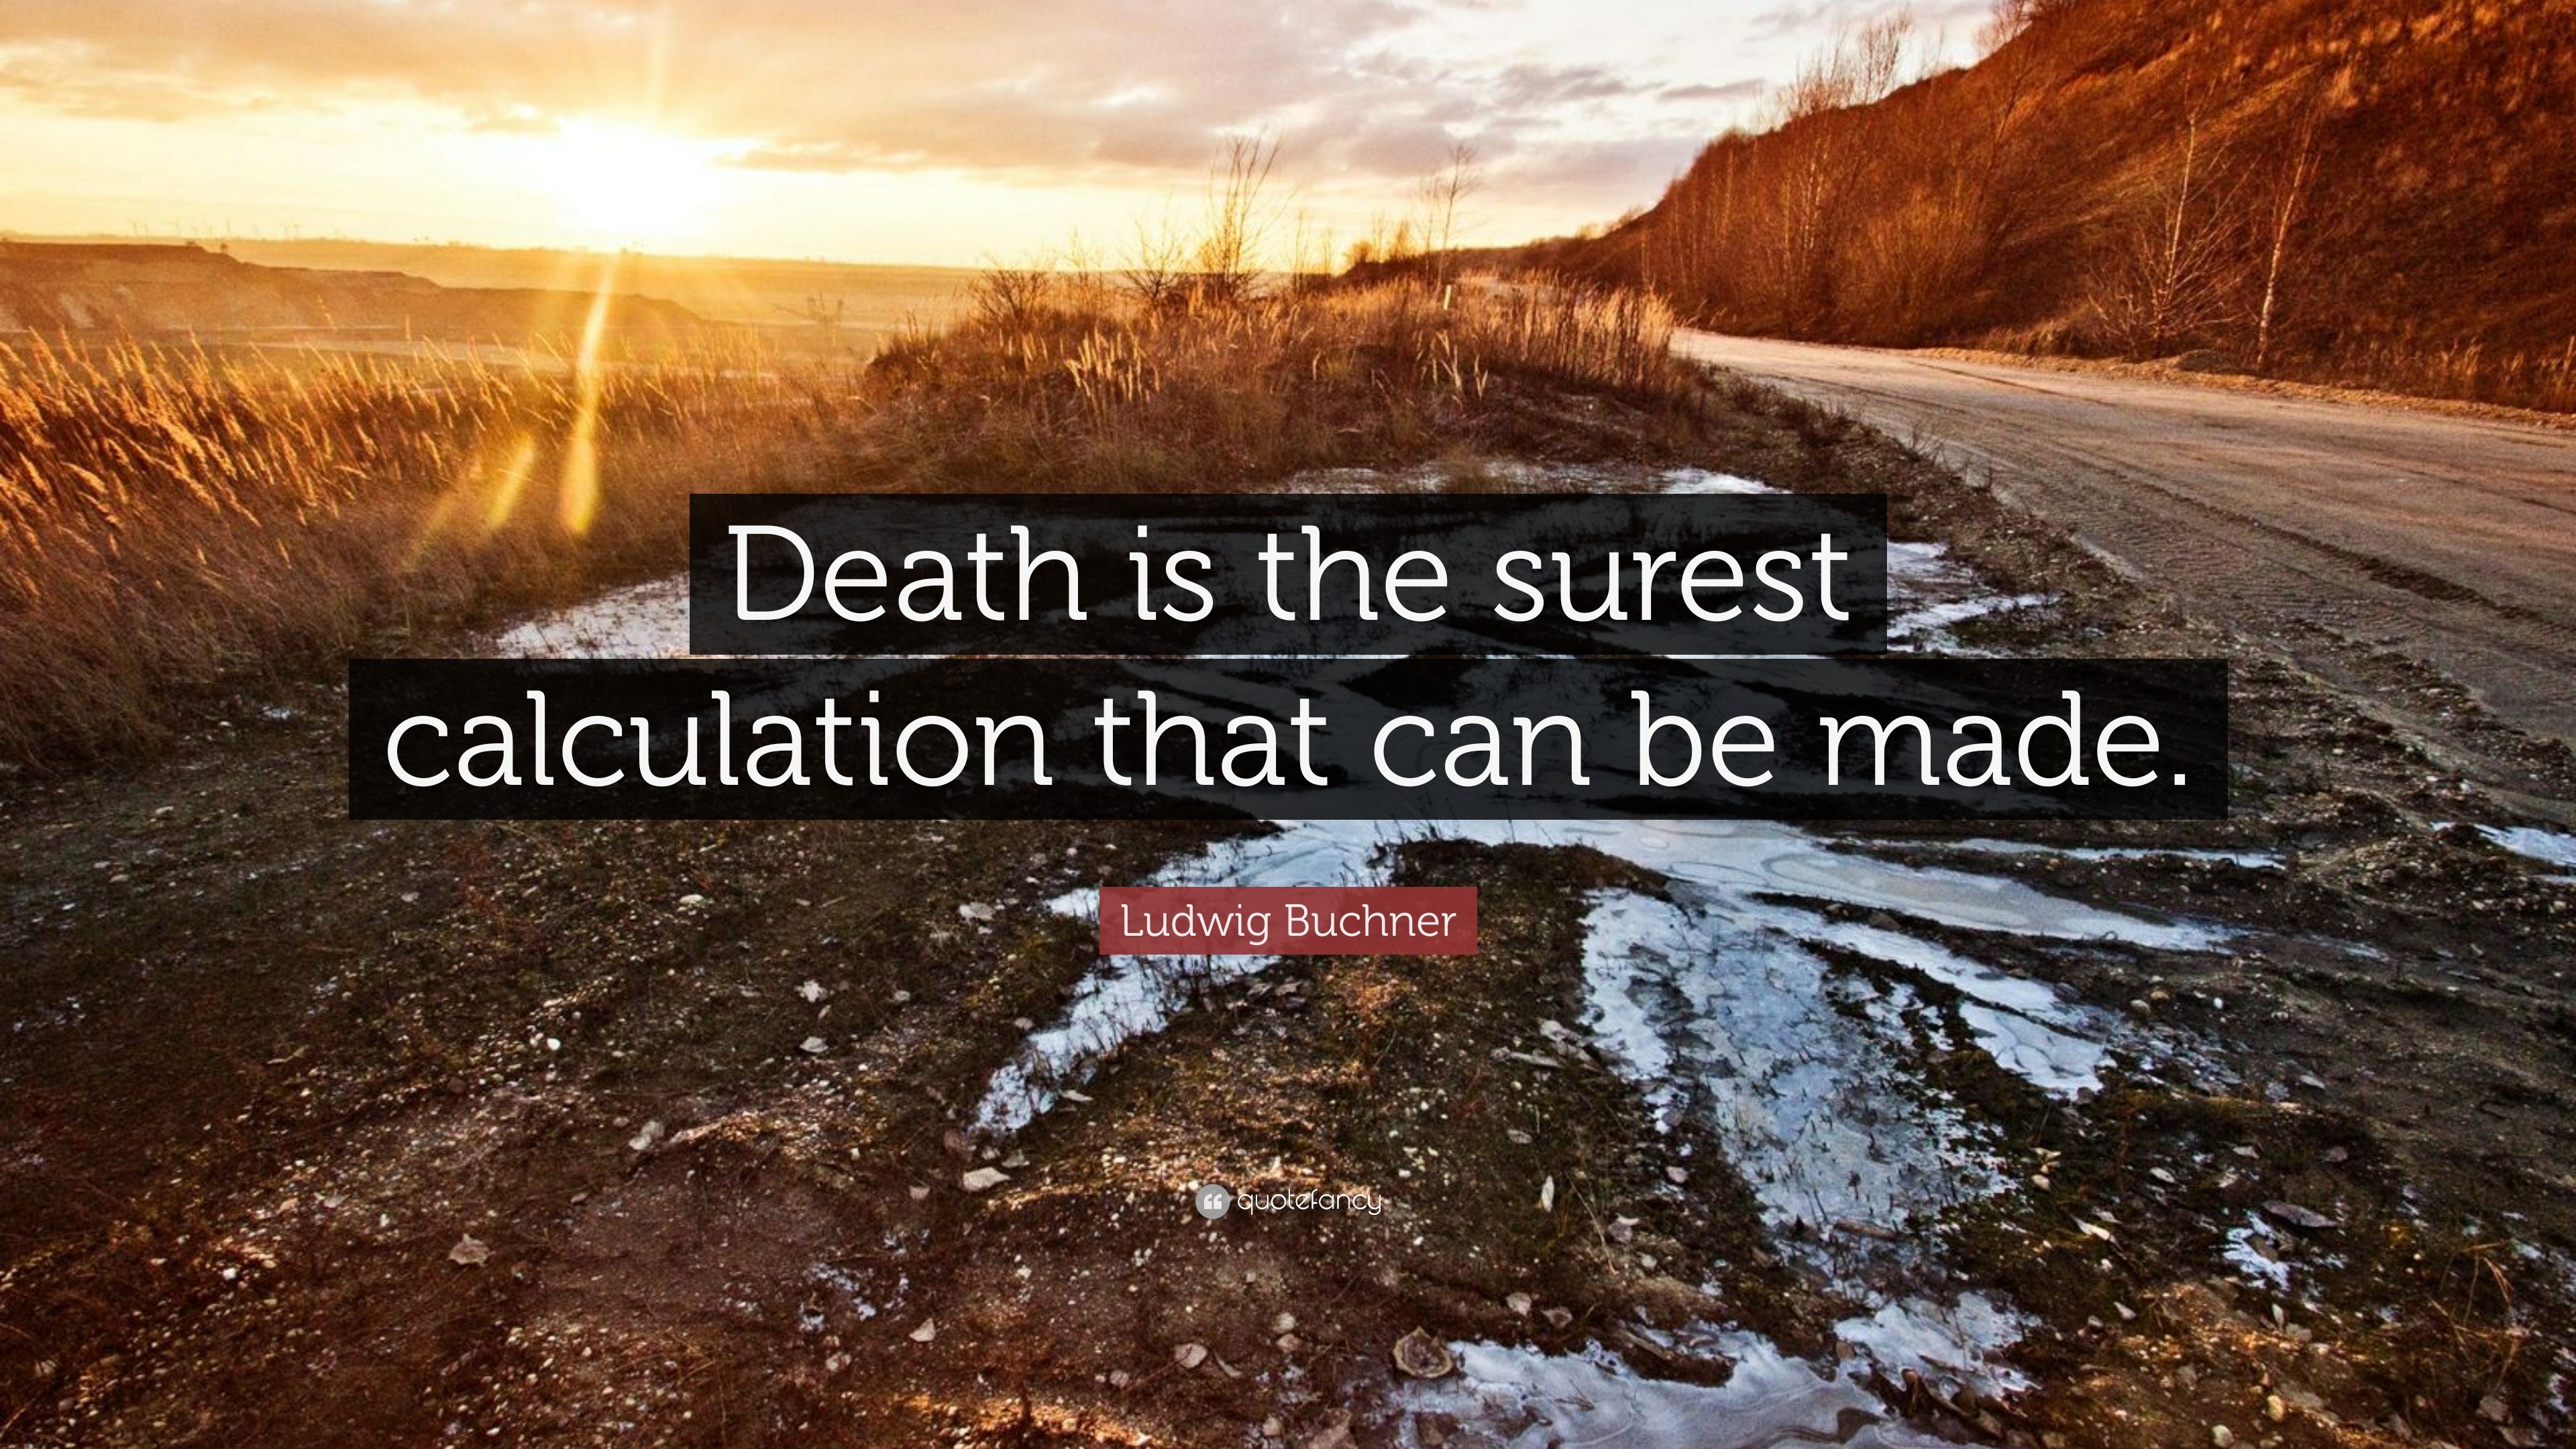 Ludwig Buchner Quote: “Death is the surest calculation that can be made.”